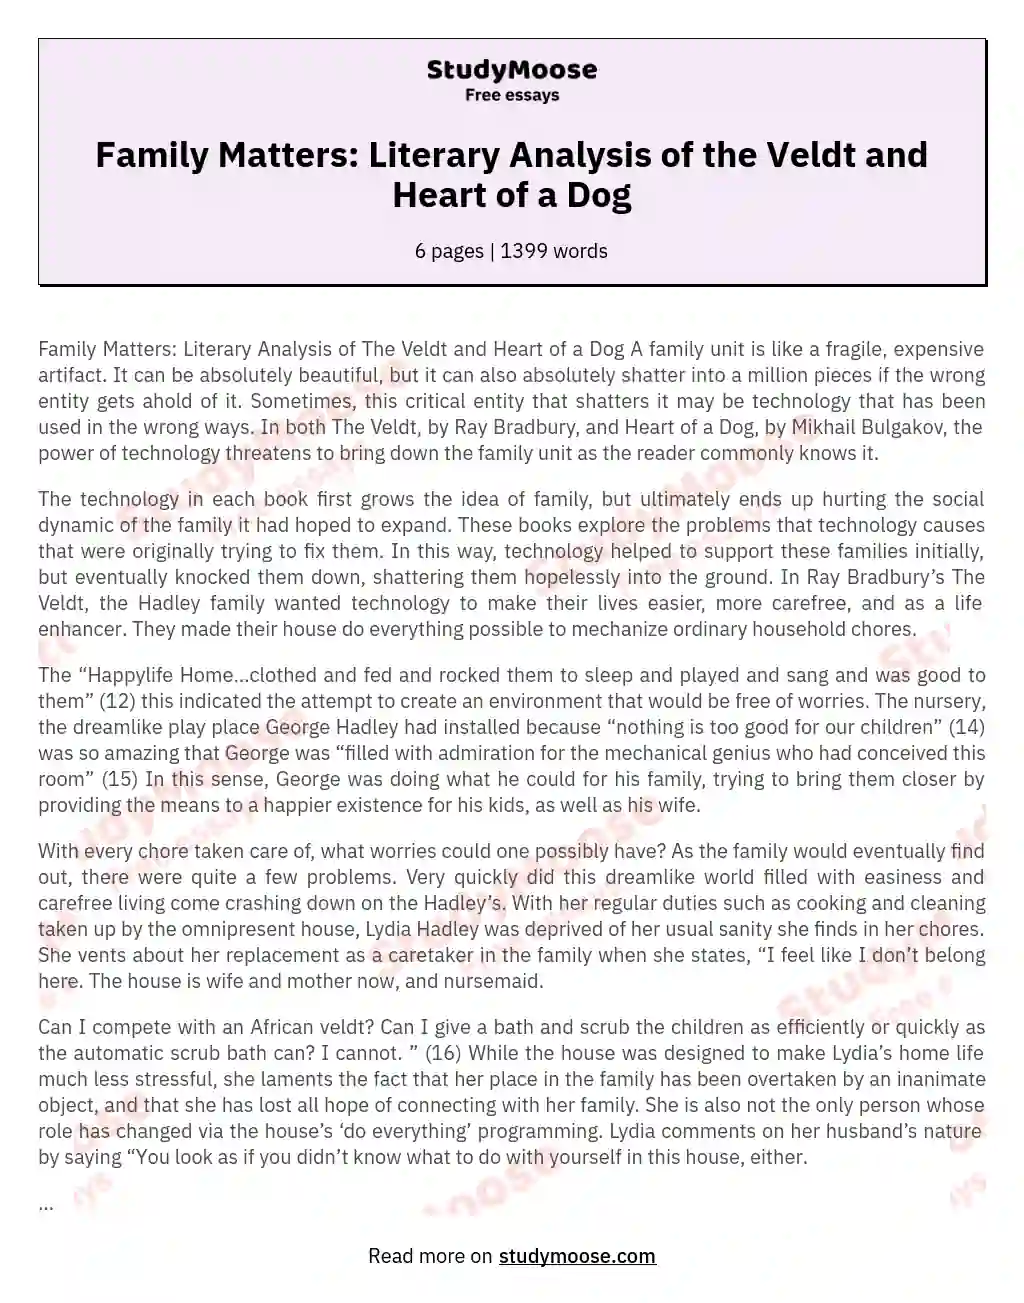 Family Matters: Literary Analysis of the Veldt and Heart of a Dog essay